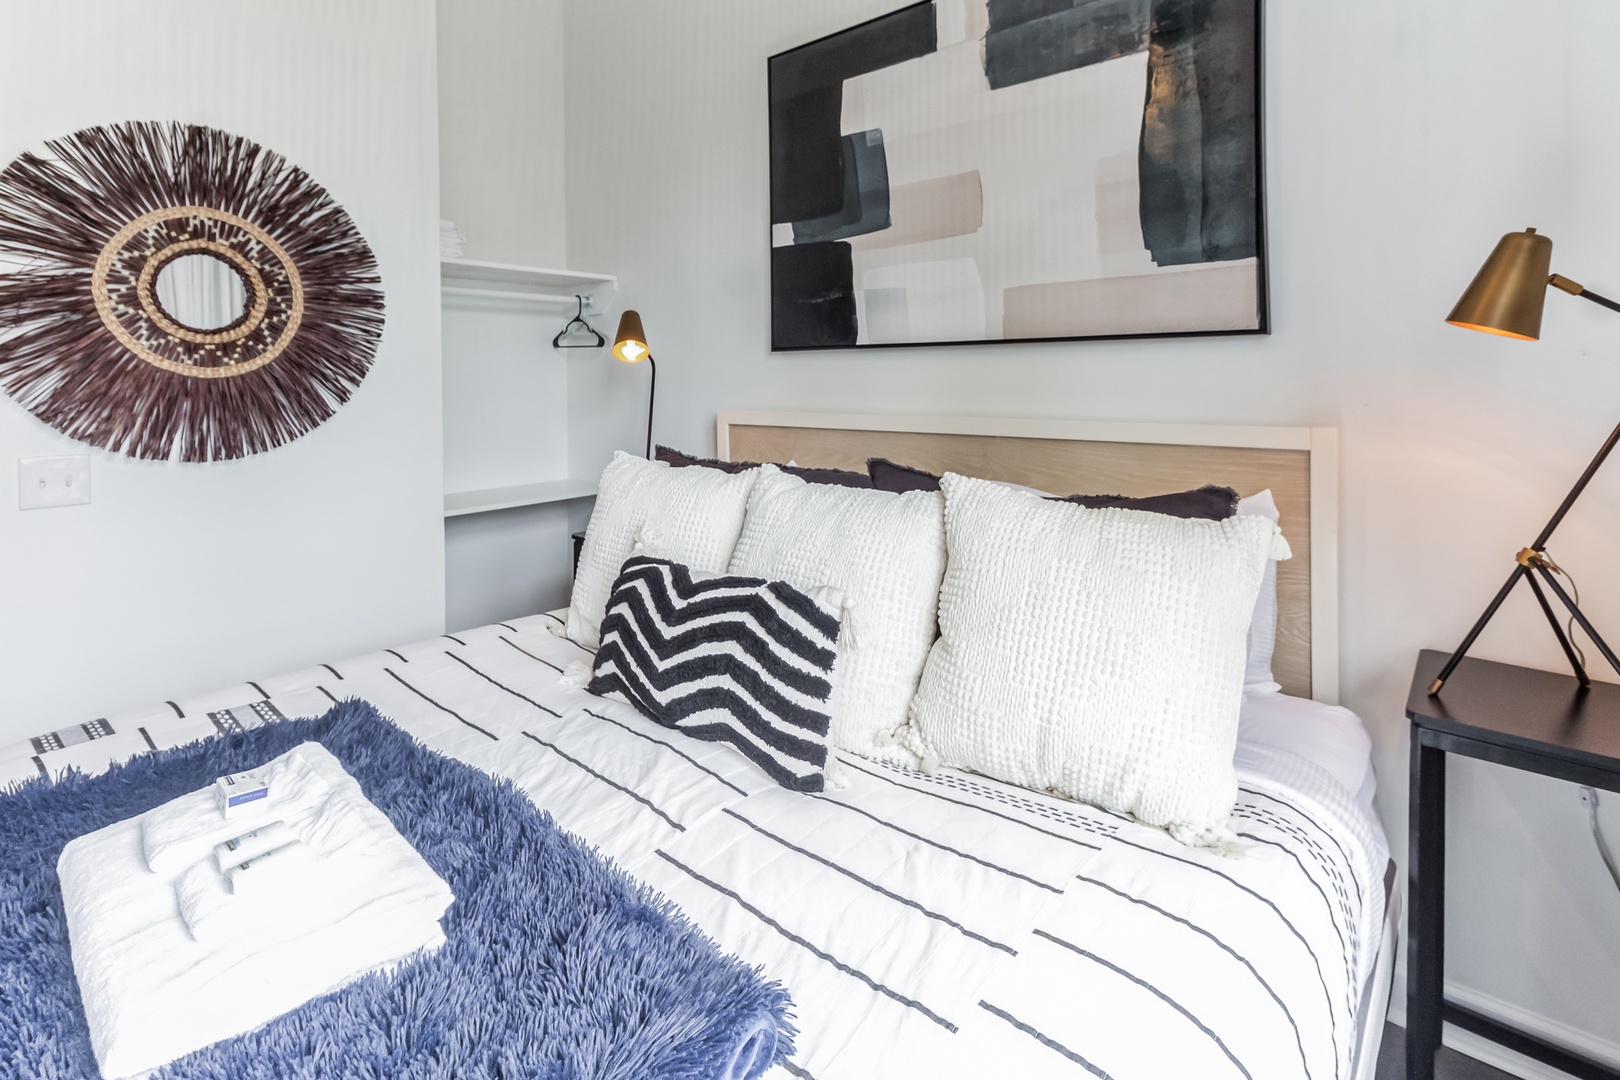 Unit C1: The private bedroom offers a luxurious king-sized bed & Smart TV